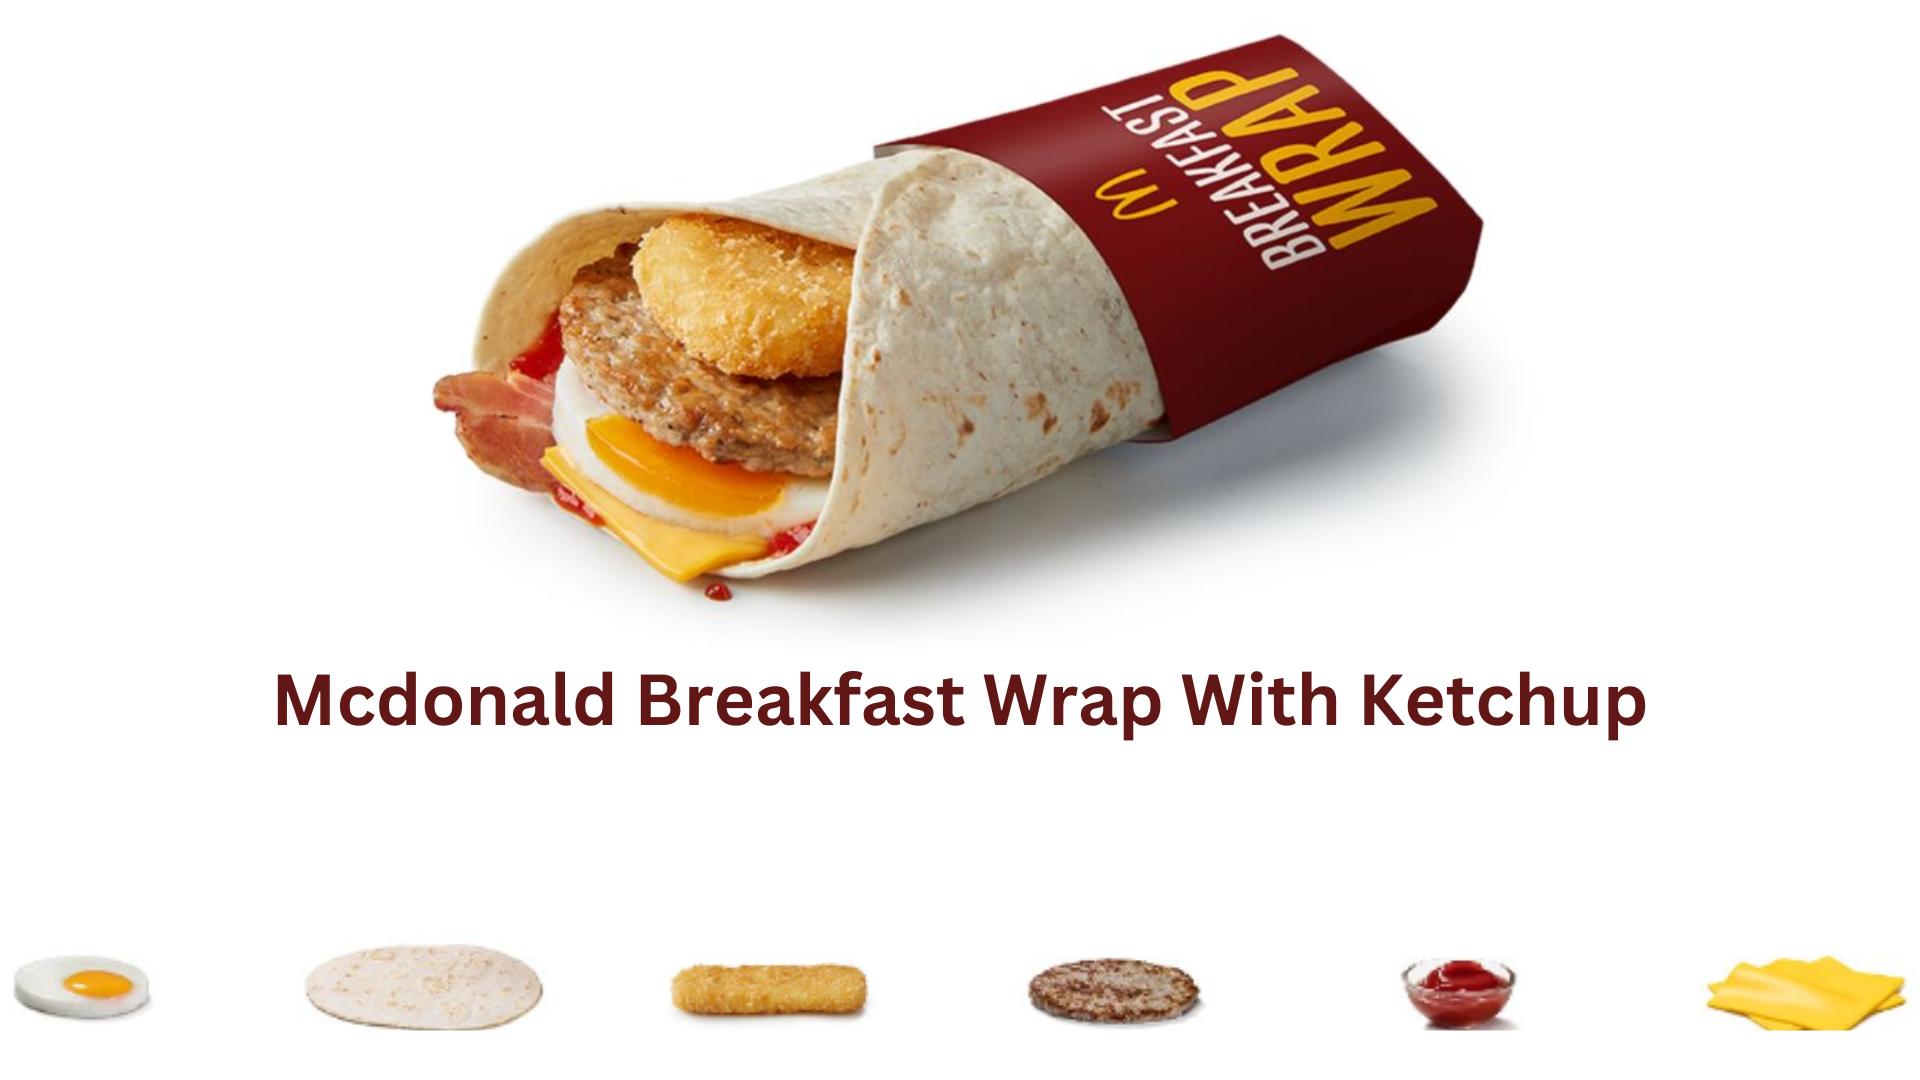 Mcdonald Breakfast Wrap With Ketchup